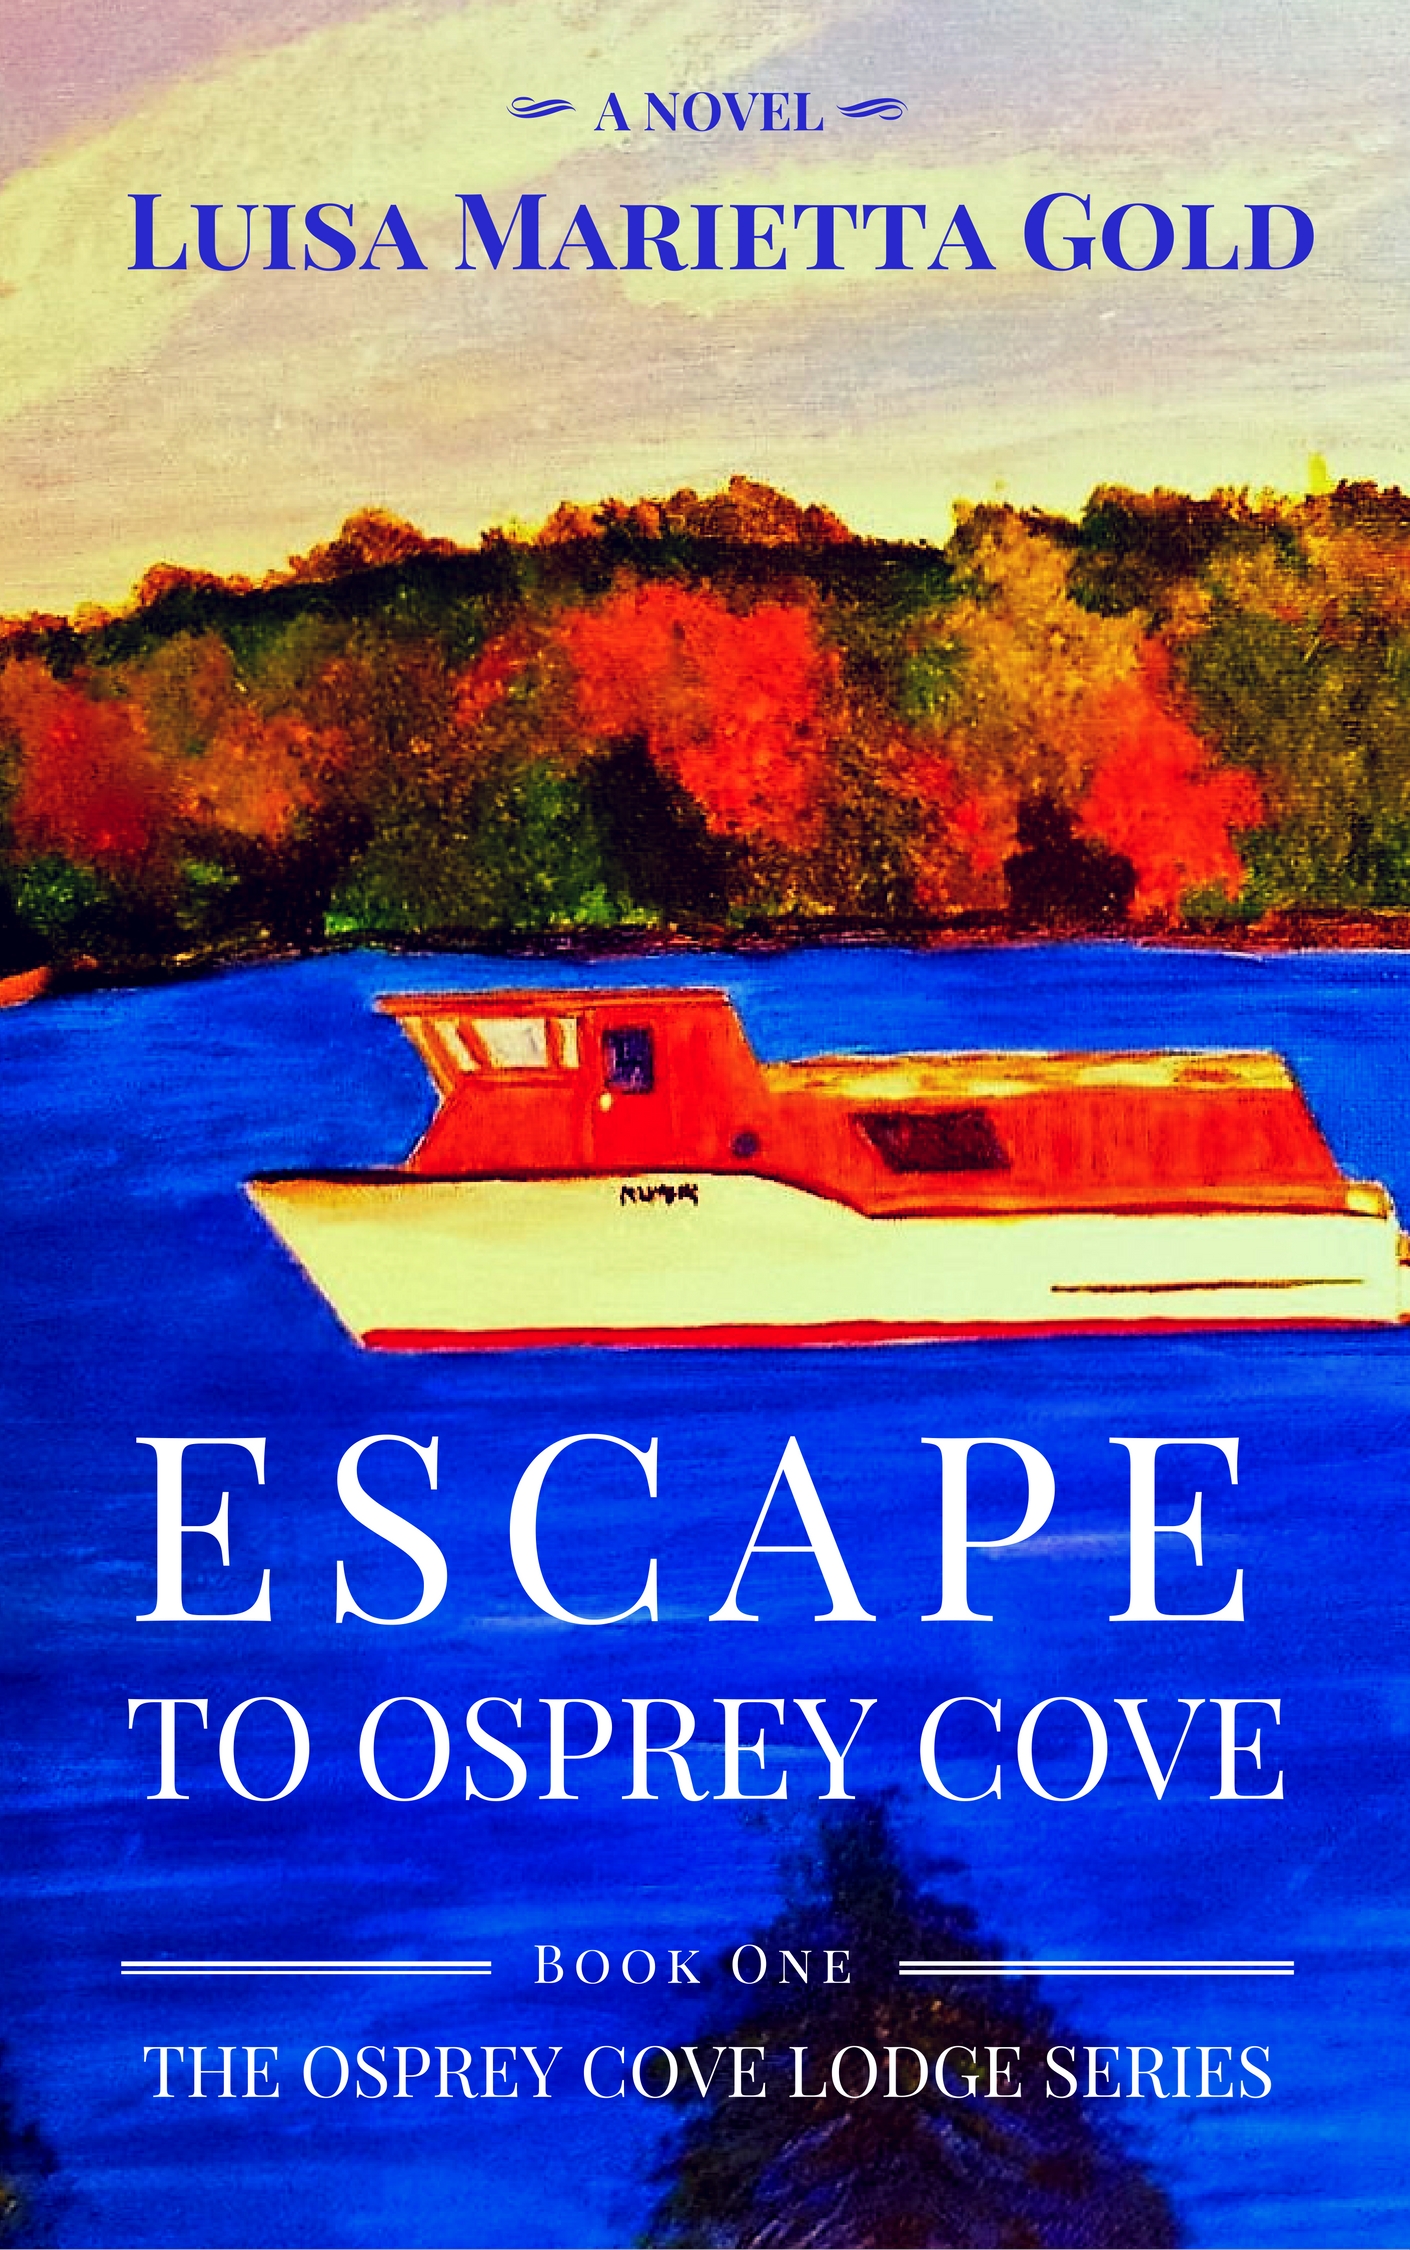 FREE: Escape to Osprey Cove by June Wert